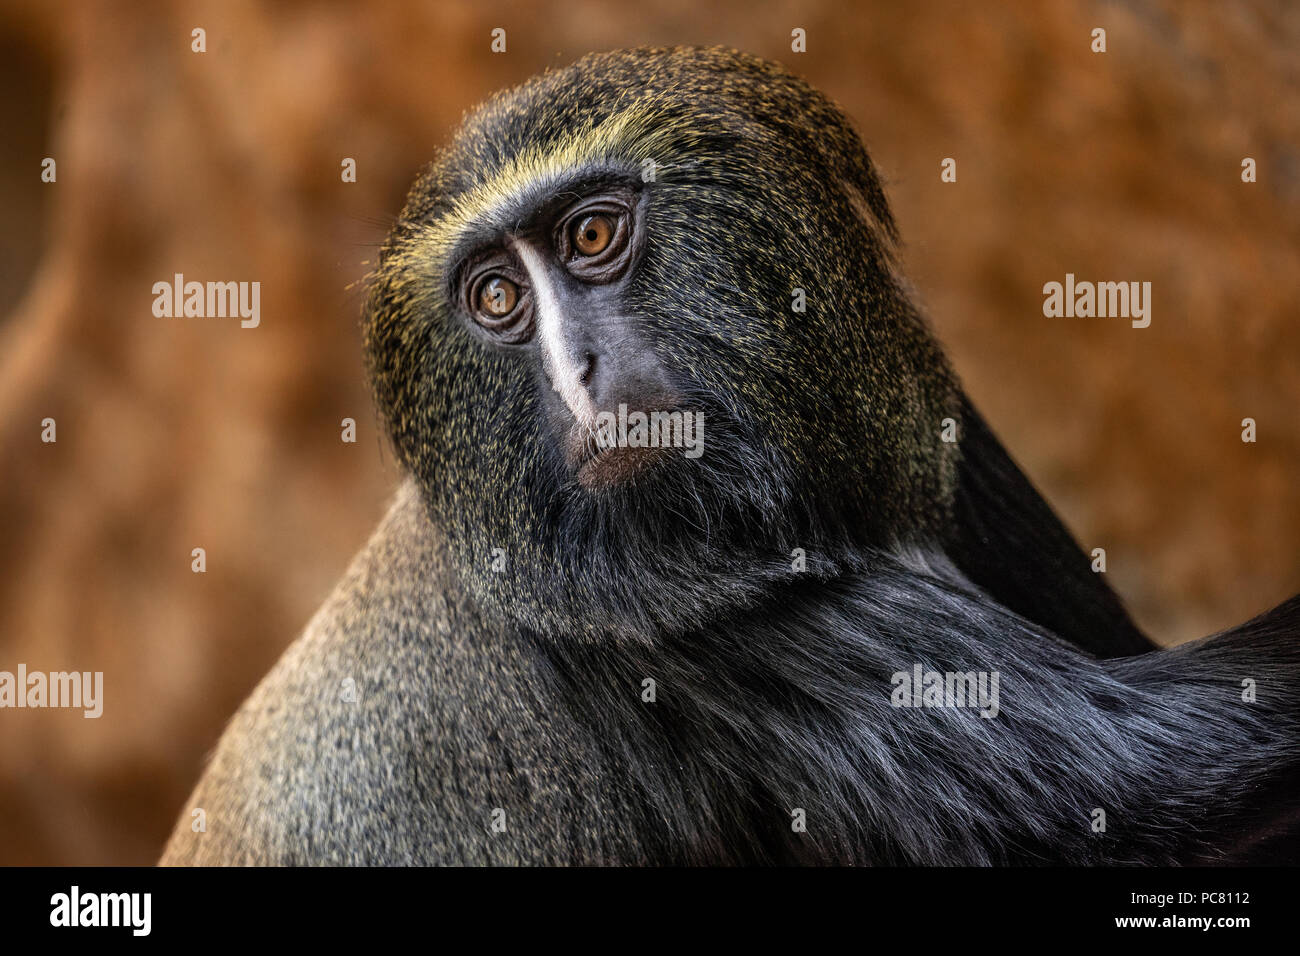 The Hamlyn's monkey (Cercopithecus hamlyni), also known as the owl-faced monkey, is a species of Old World monkey . Stock Photo